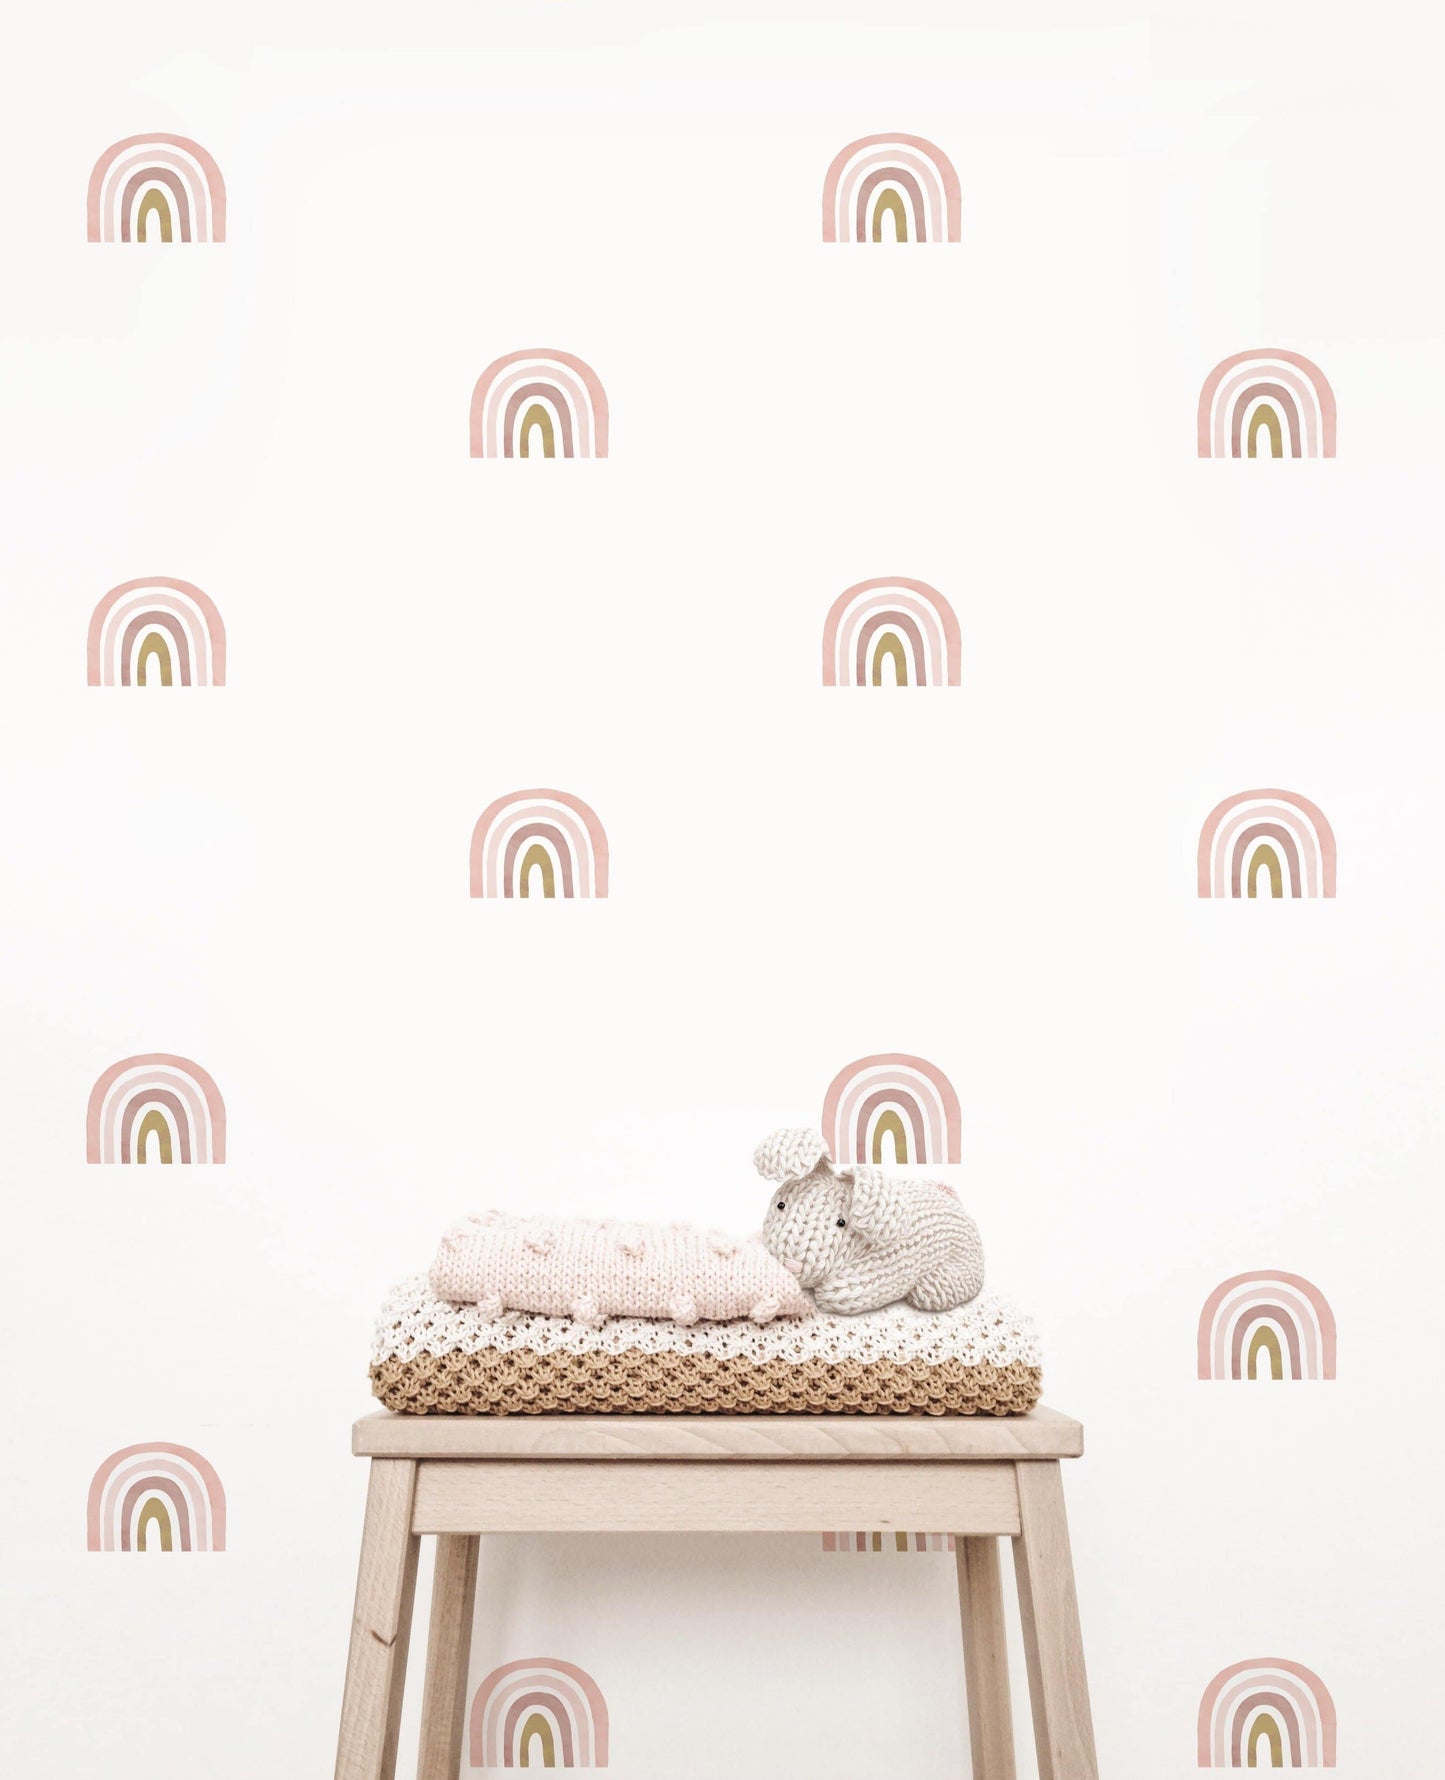 Rainbow Wall Decals (Pink) - Wall Decals - Fable and Fawn 